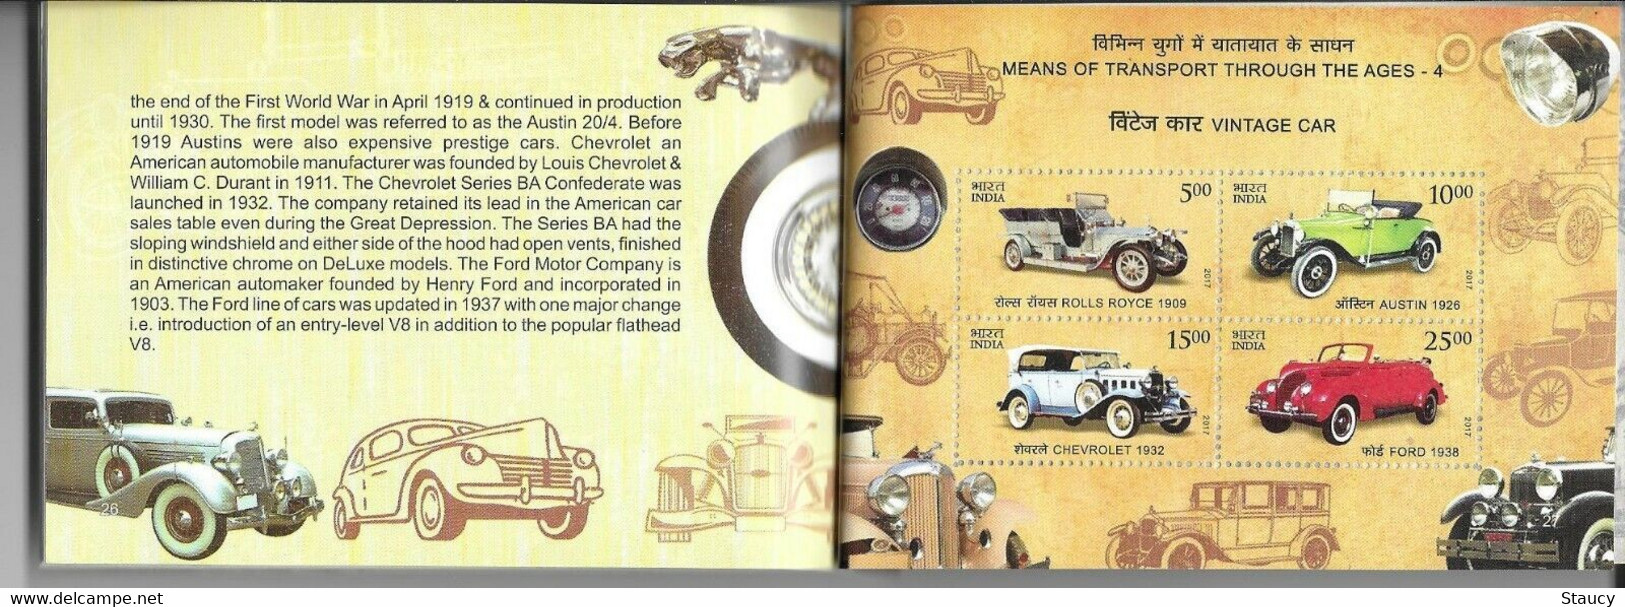 India 2017 Means Of Transport Through Ages Complete Prestige Booklet Containing 5 MINIATURE SHEETS MS MNH As Per Scan - Otros (Tierra)